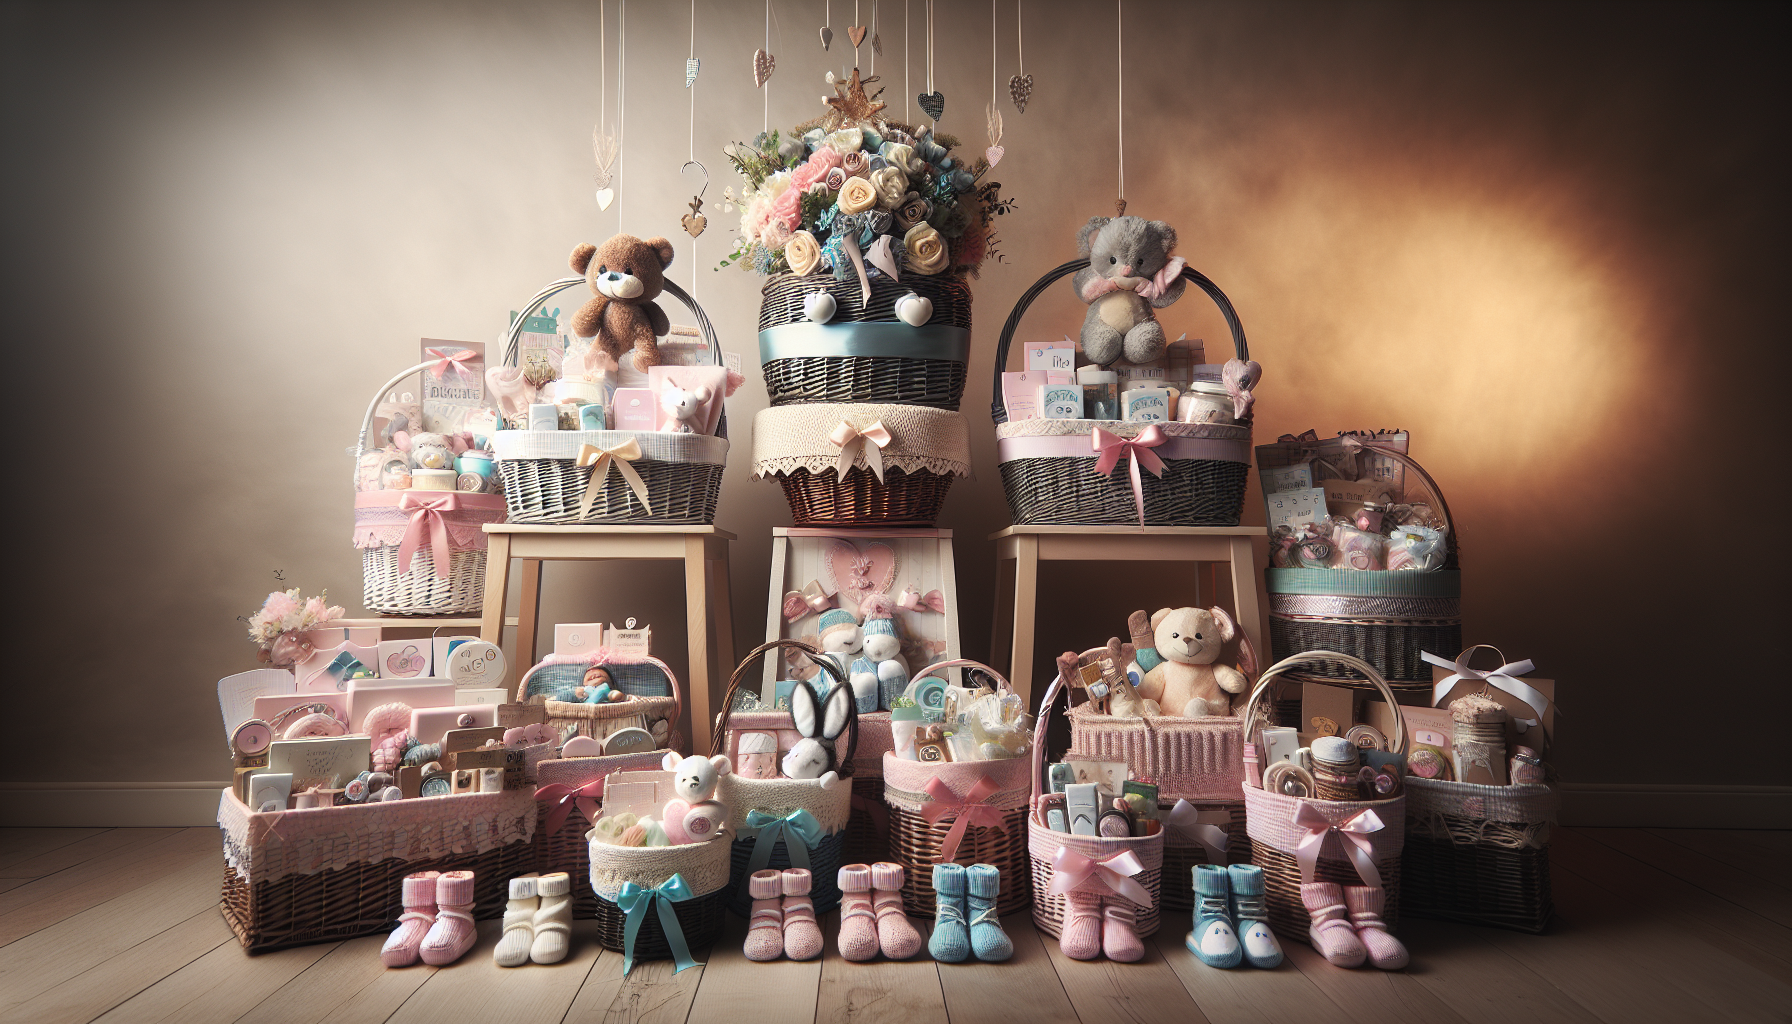 15 Heartwarming Baby Gift Baskets for New Parents